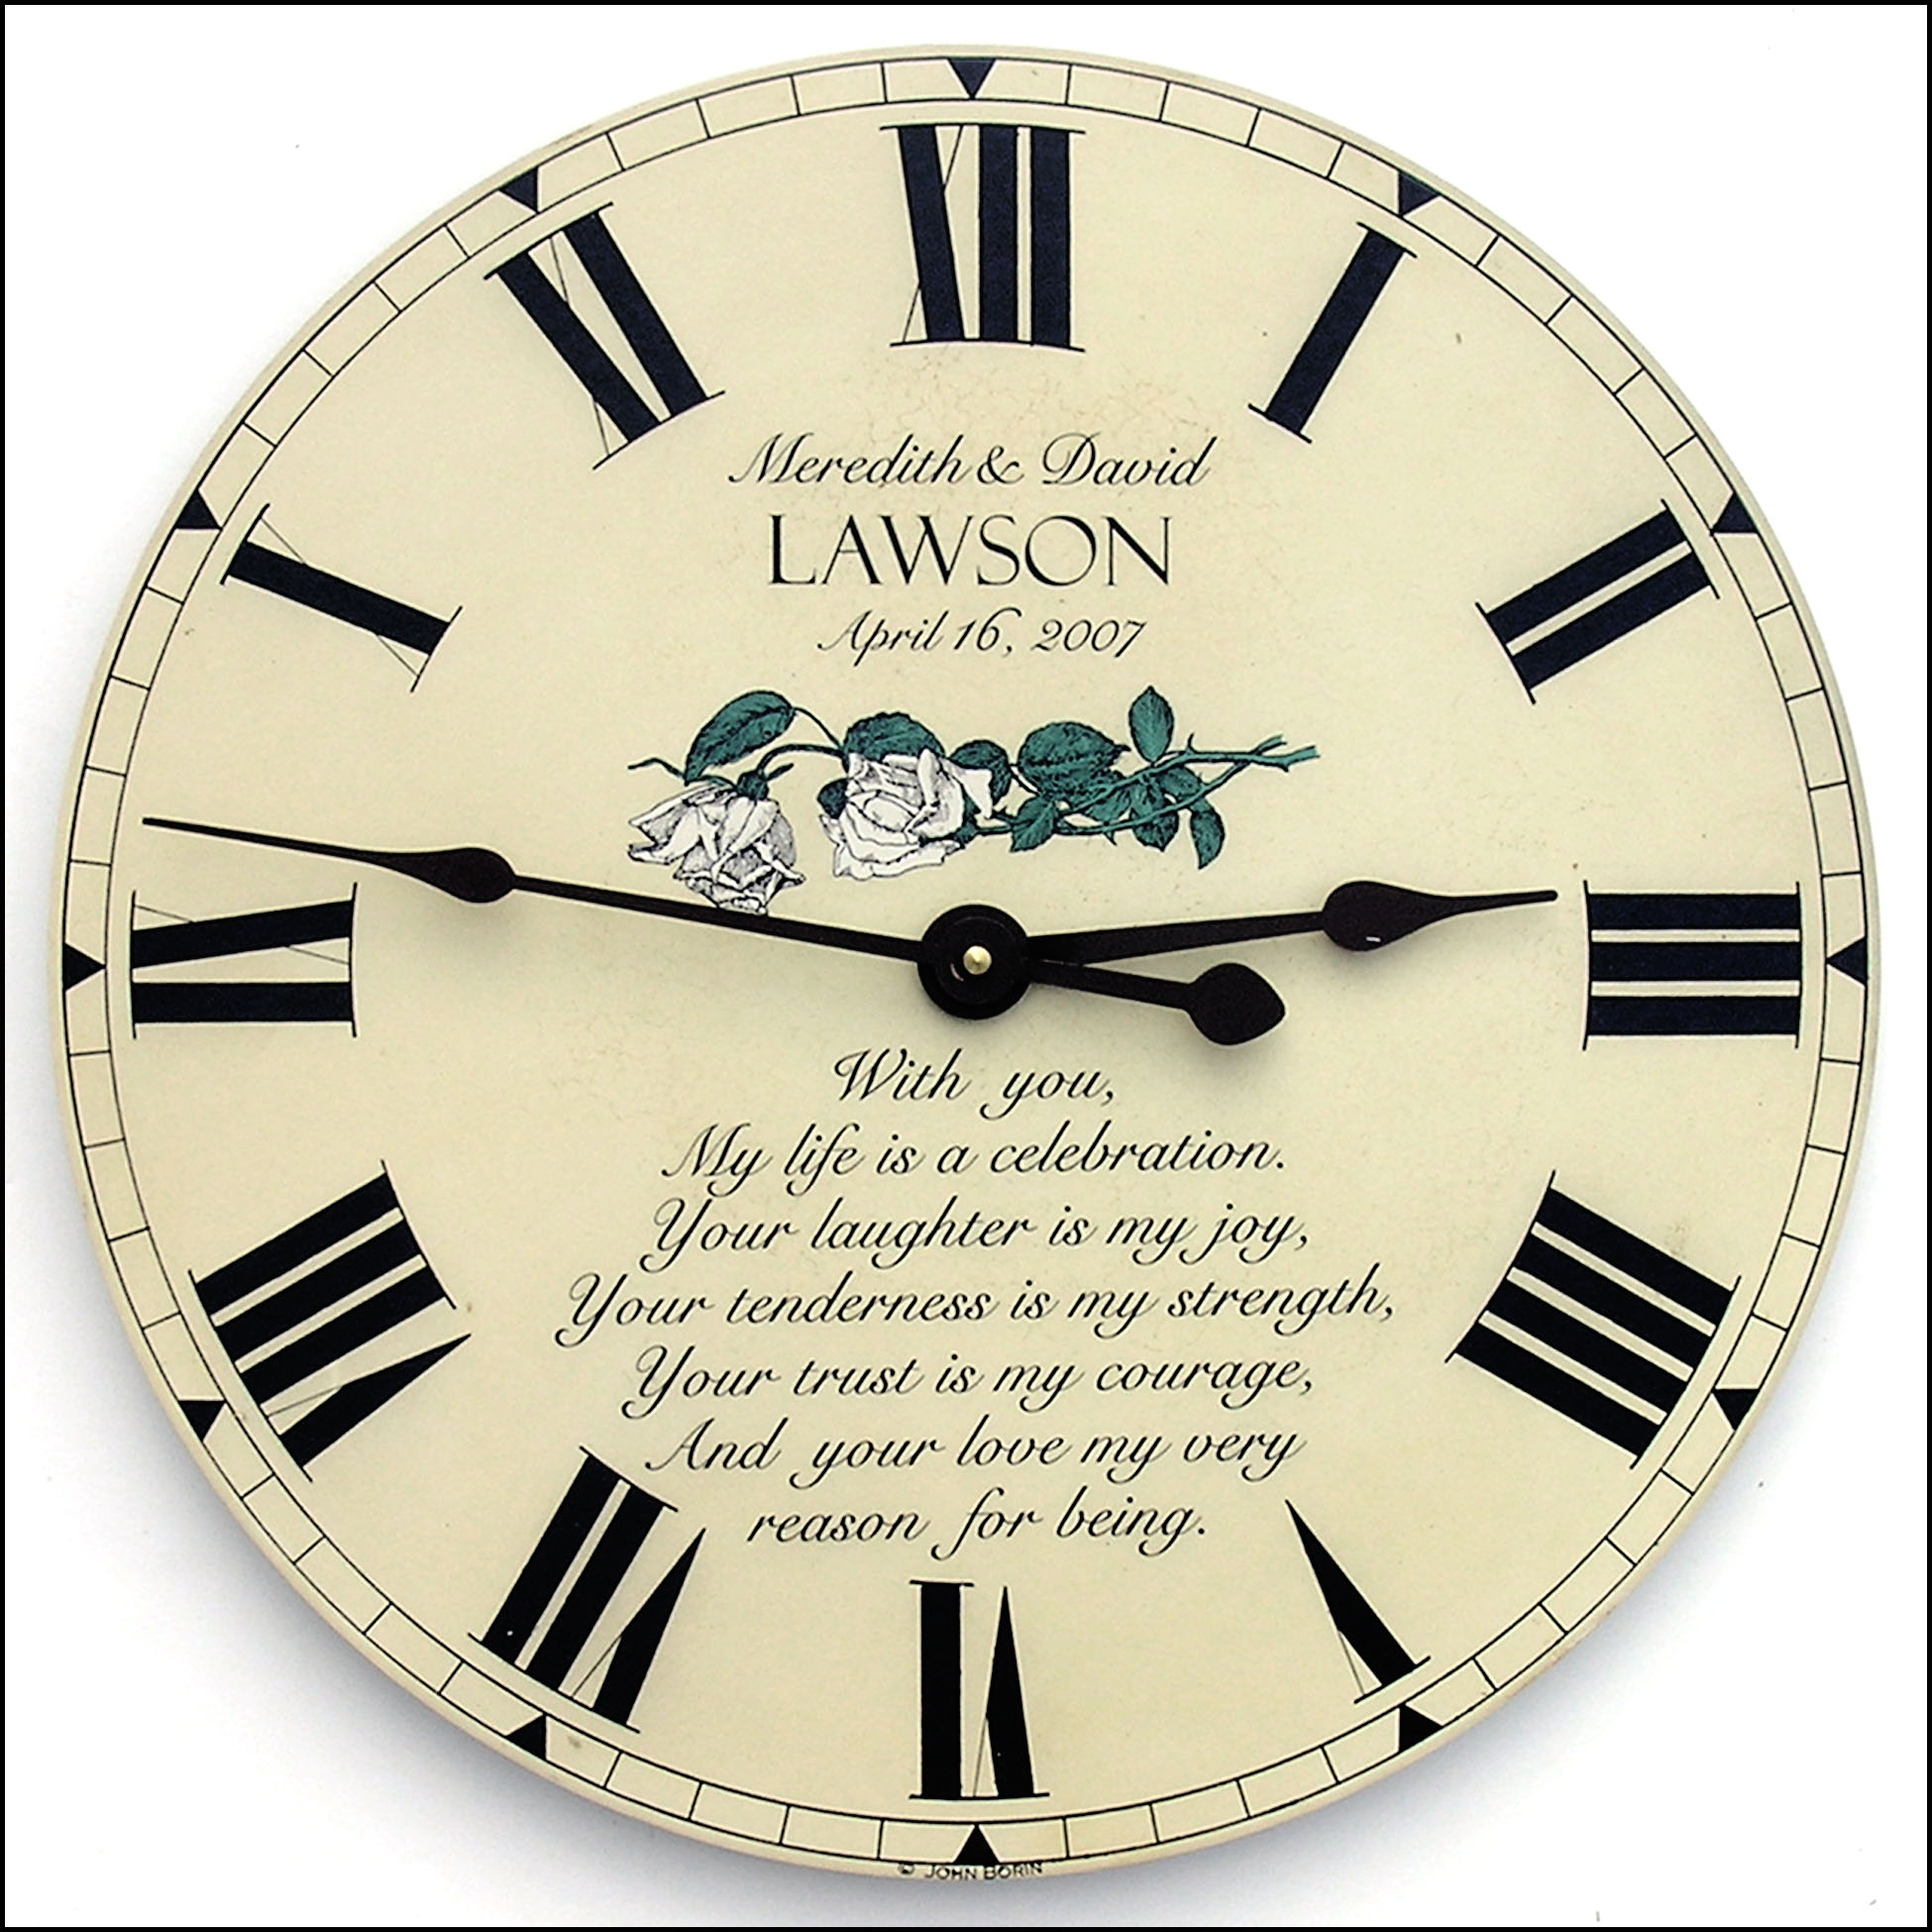 Their Vows on a Clock